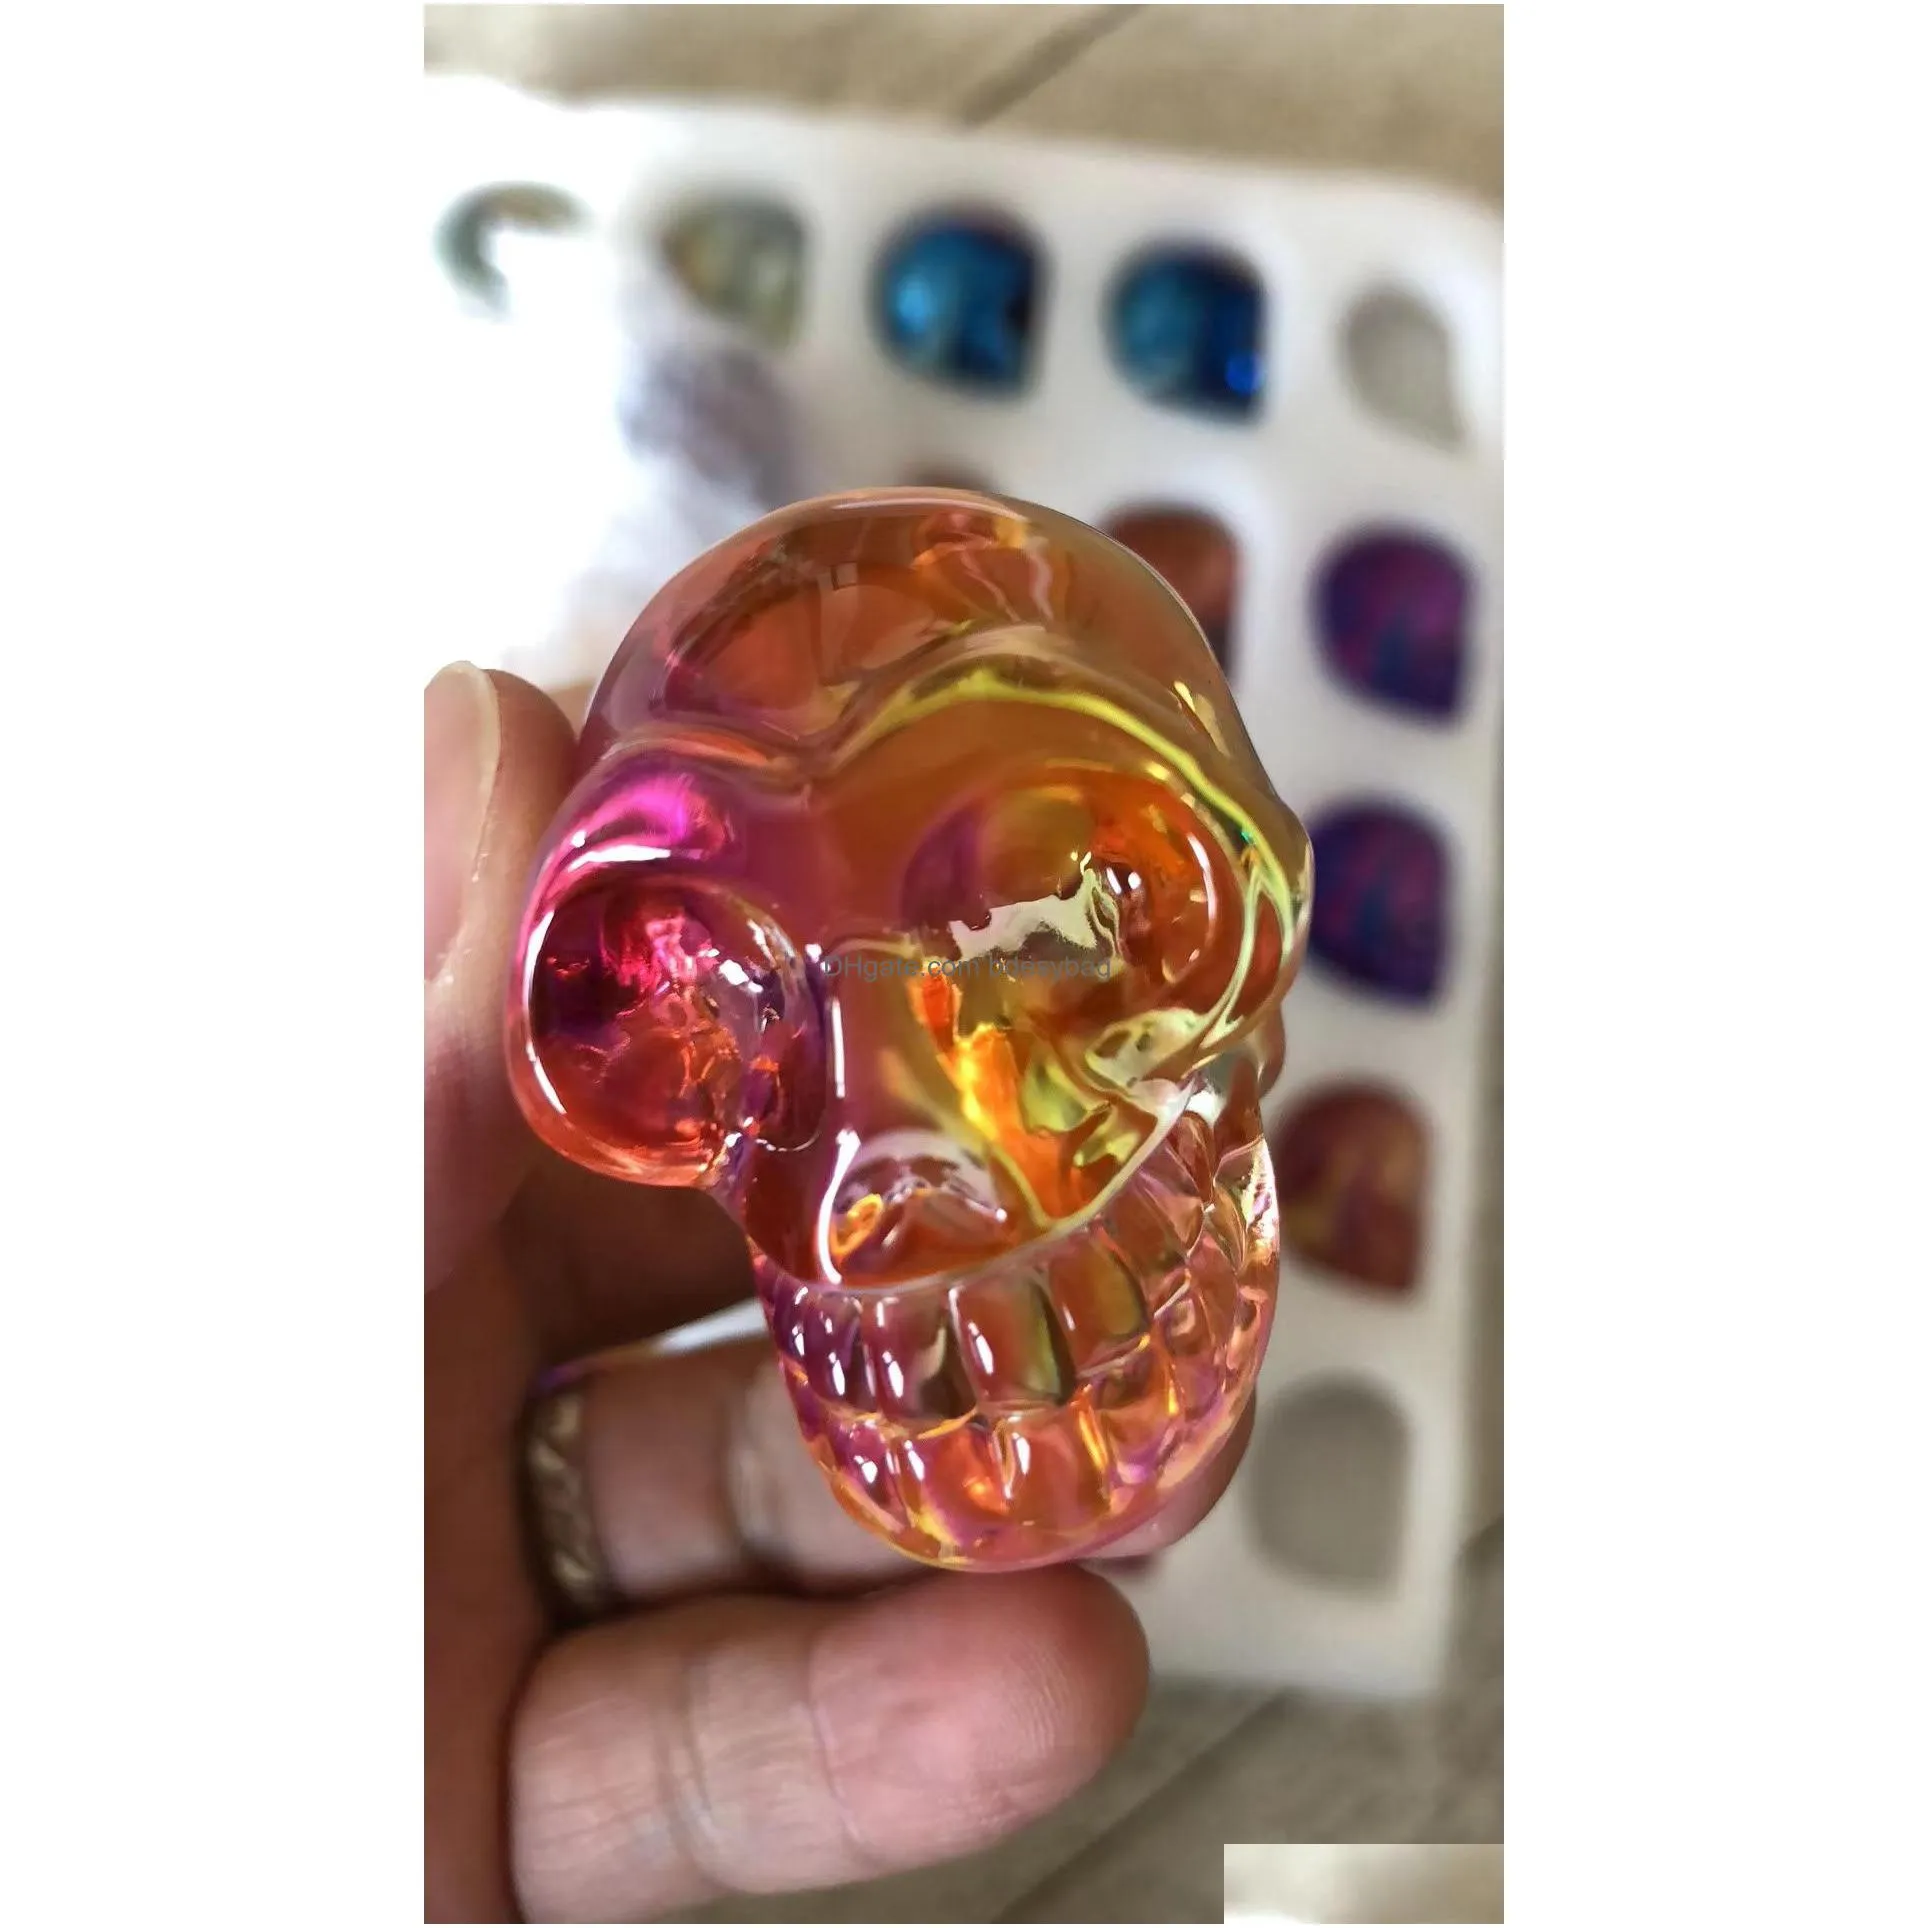 2021 new halloween glass skull pendant size 2 inch multicolor skulls decoration for women jewelry gifts